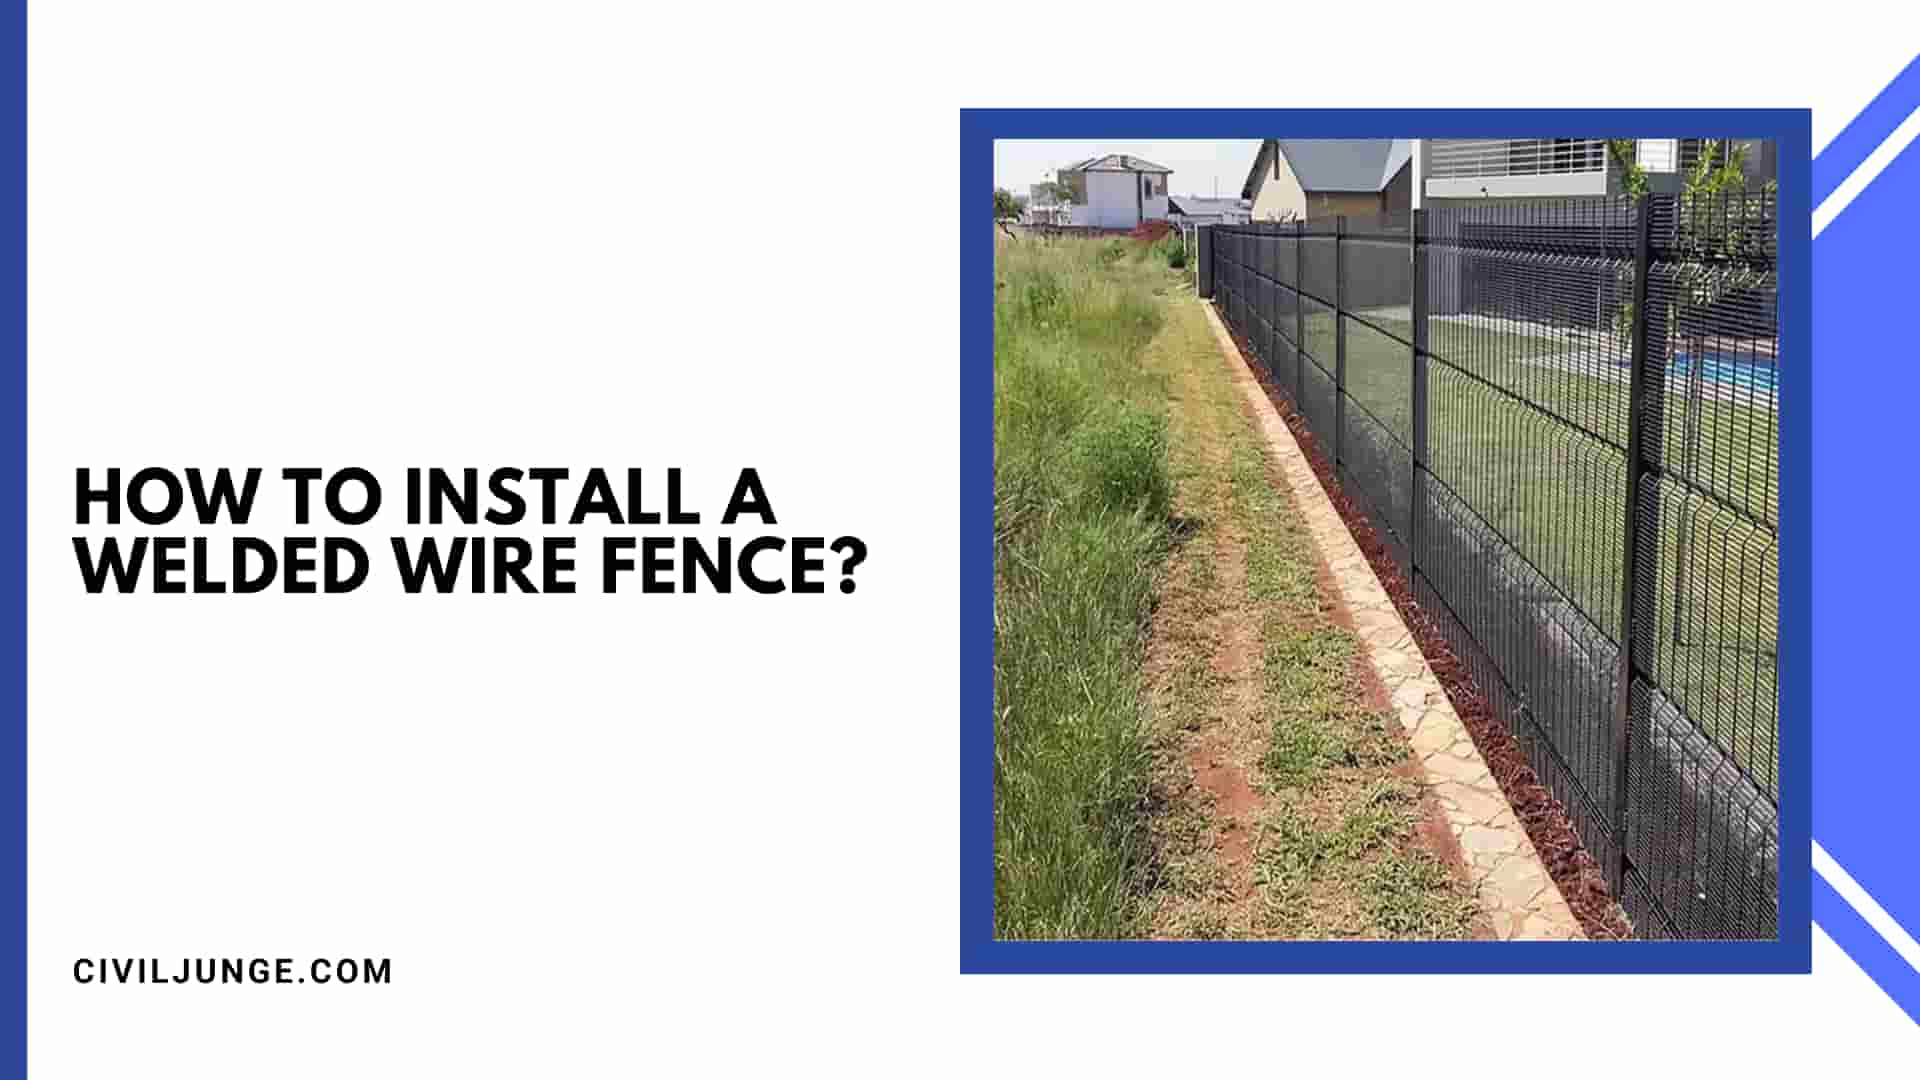 How To Install A Welded Wire Fence | How To Install A Welded Wire Fence ...